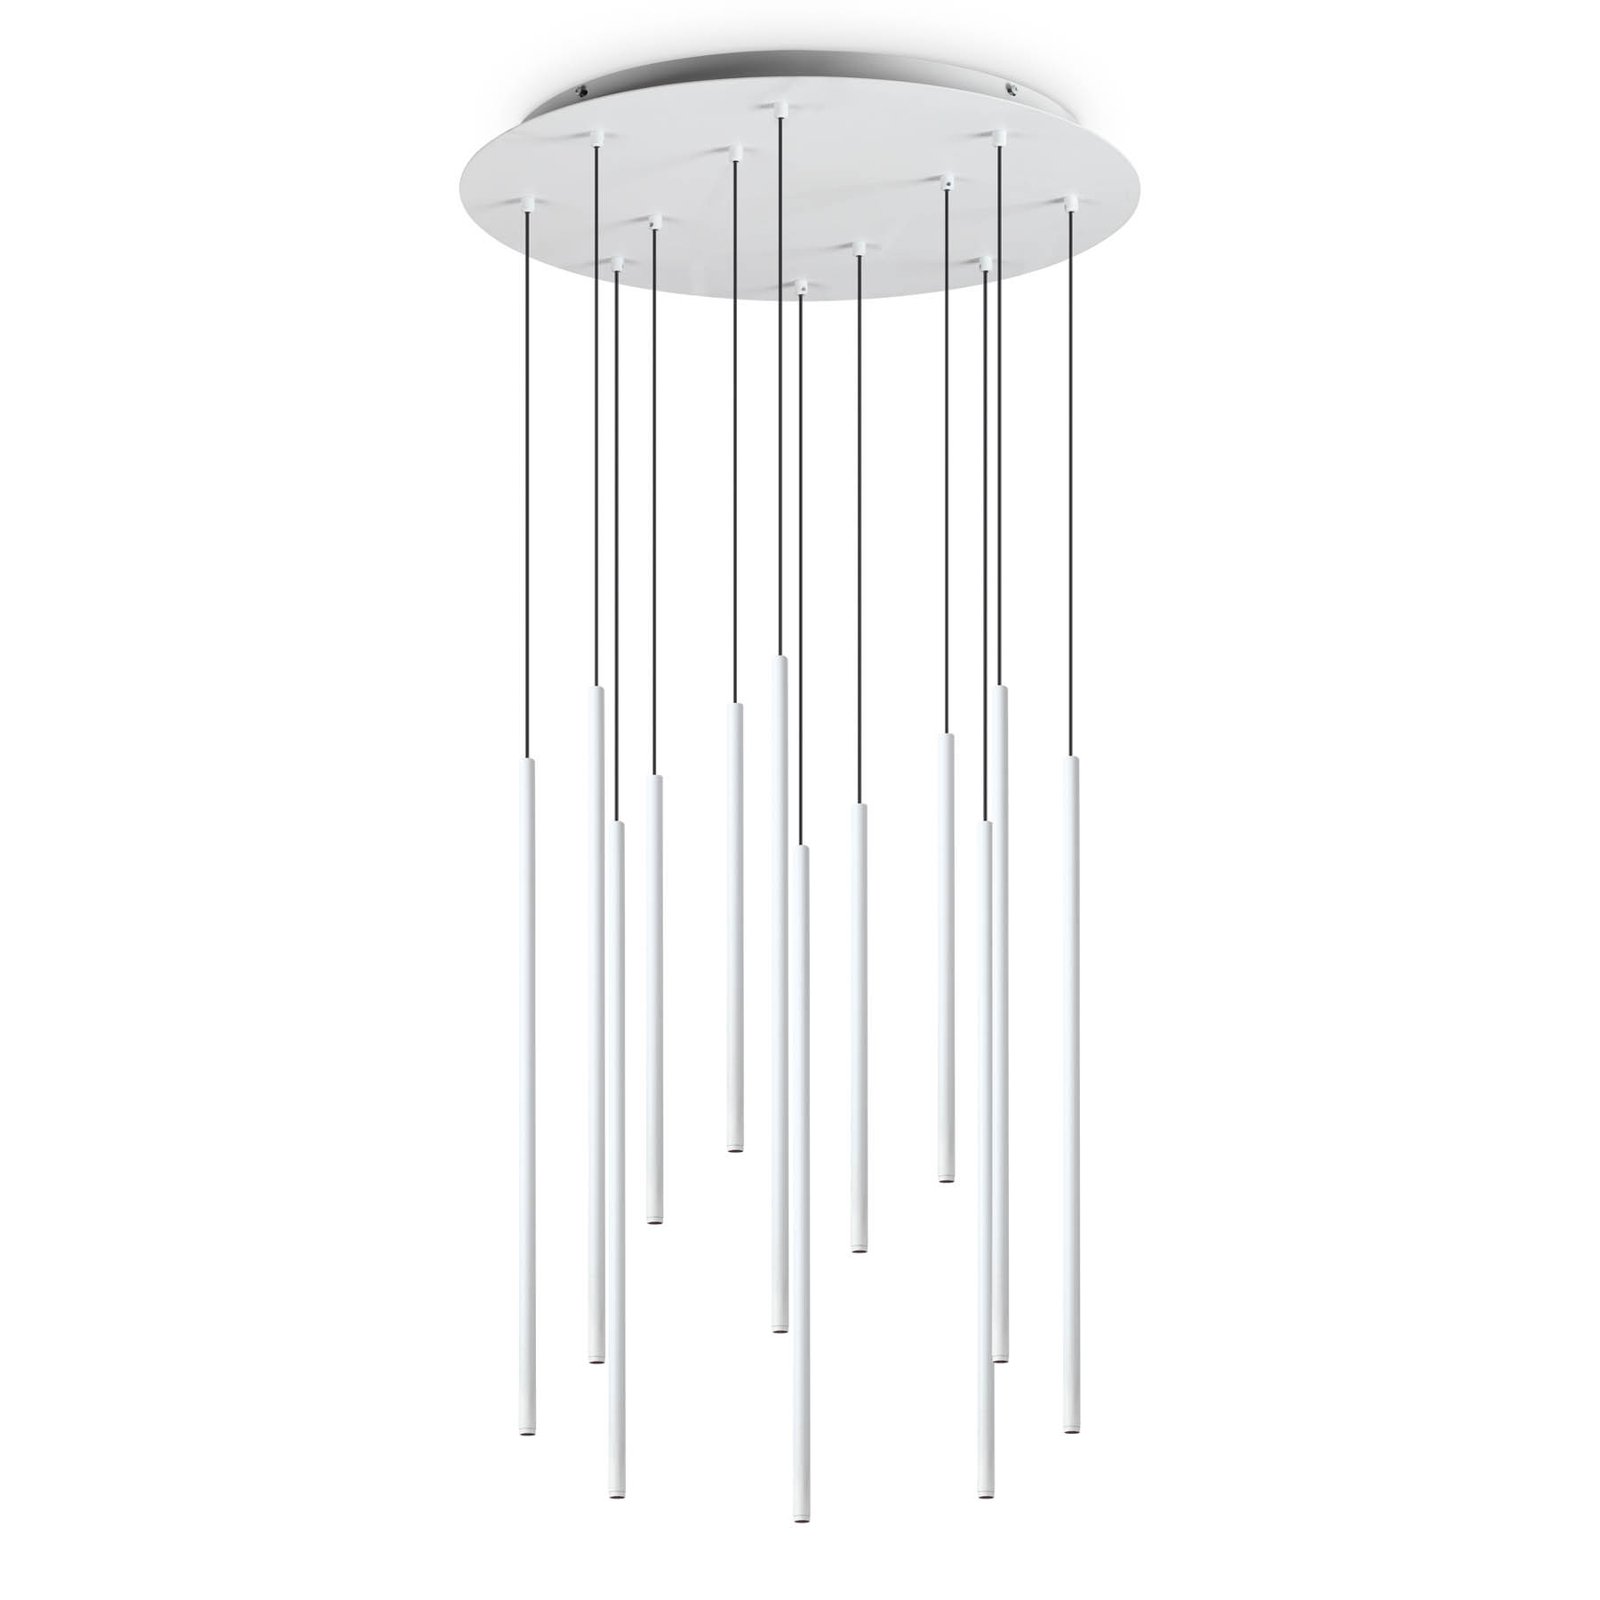 Ideal Lux Filo LED hanglamp 12-lamps wit